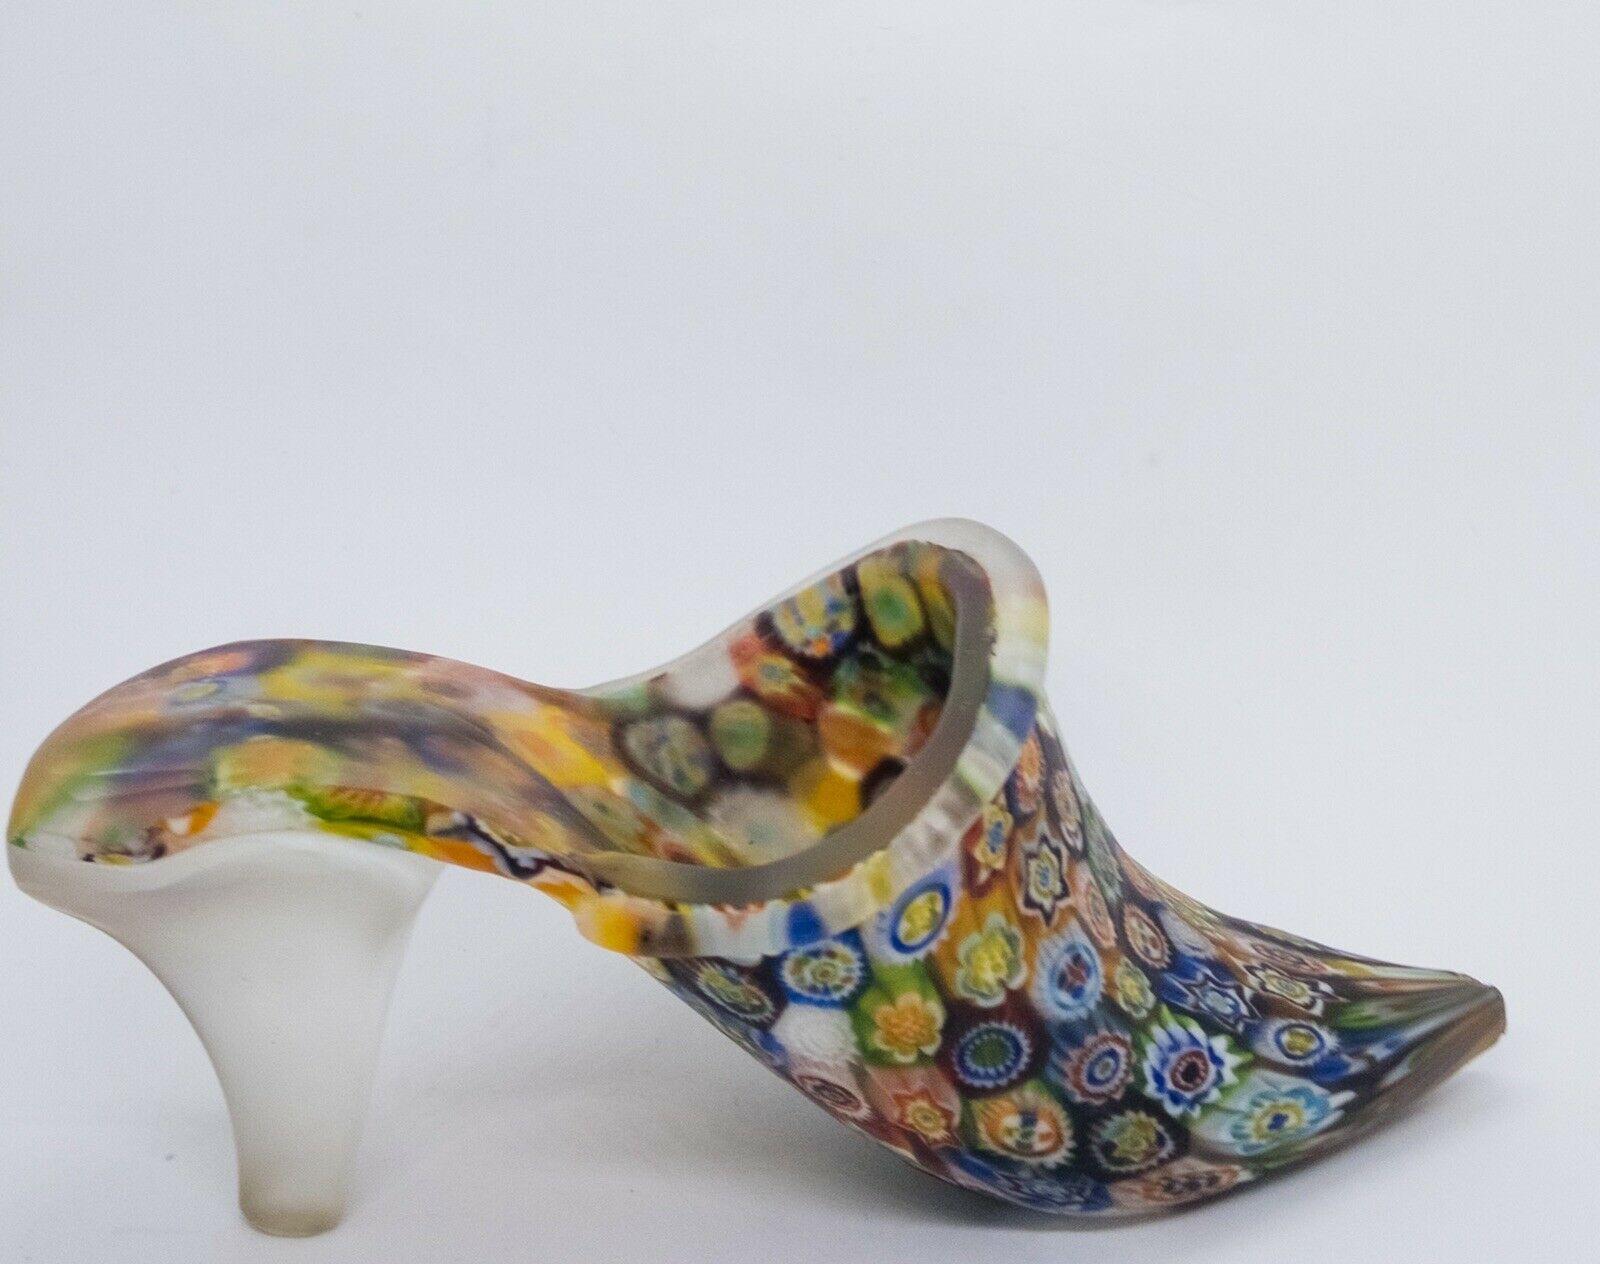 Millefiori Frosted Glass Slipper Shoe Figurine Italy Vintage